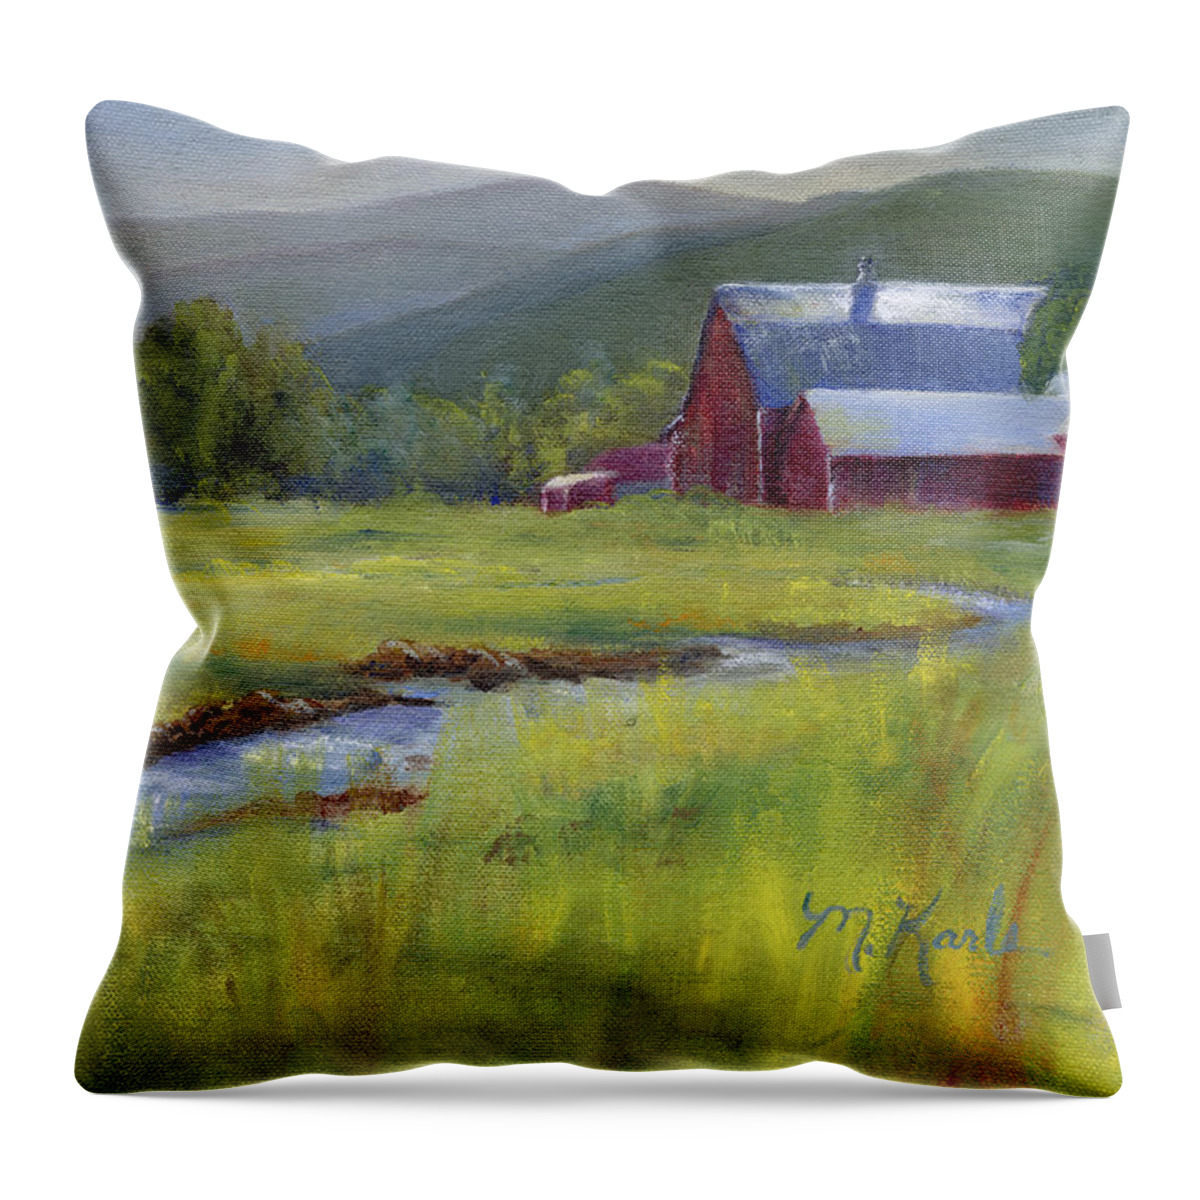 Montana Throw Pillow featuring the painting Montana Ranch by Marsha Karle